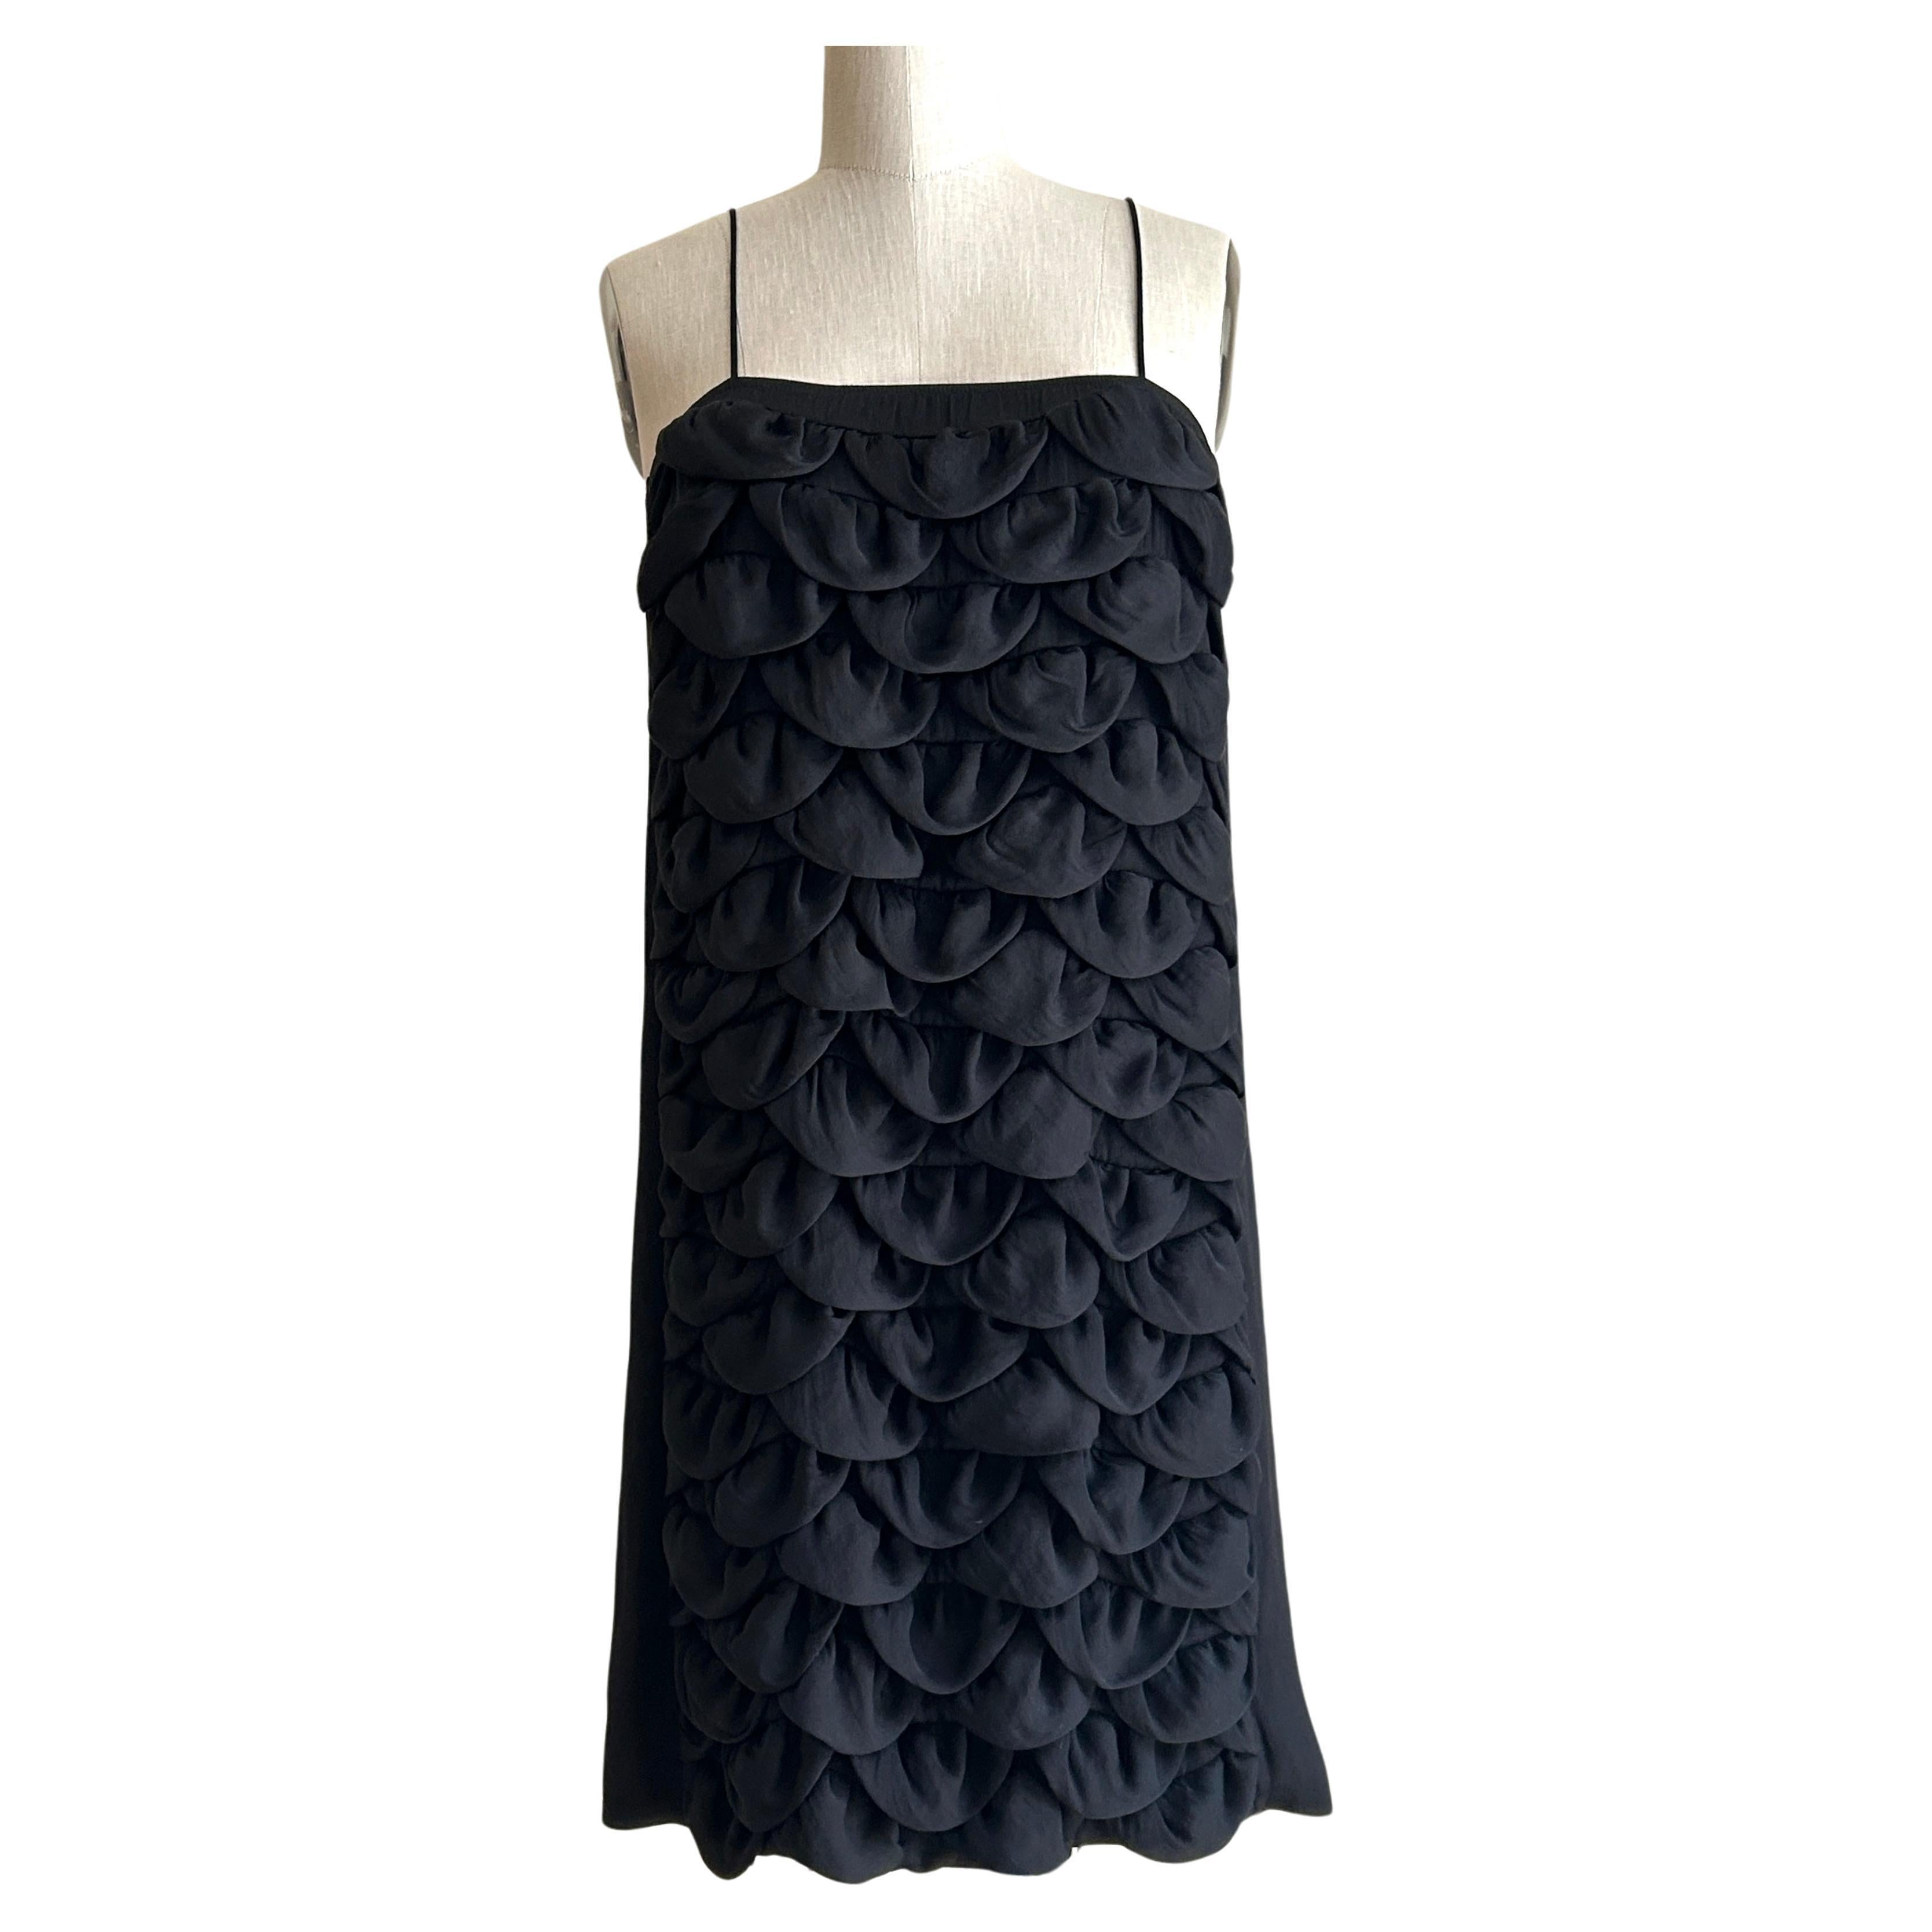 Chanel Black Petal Textured Swim Cover-Up Dress, Cruise 2009 For Sale